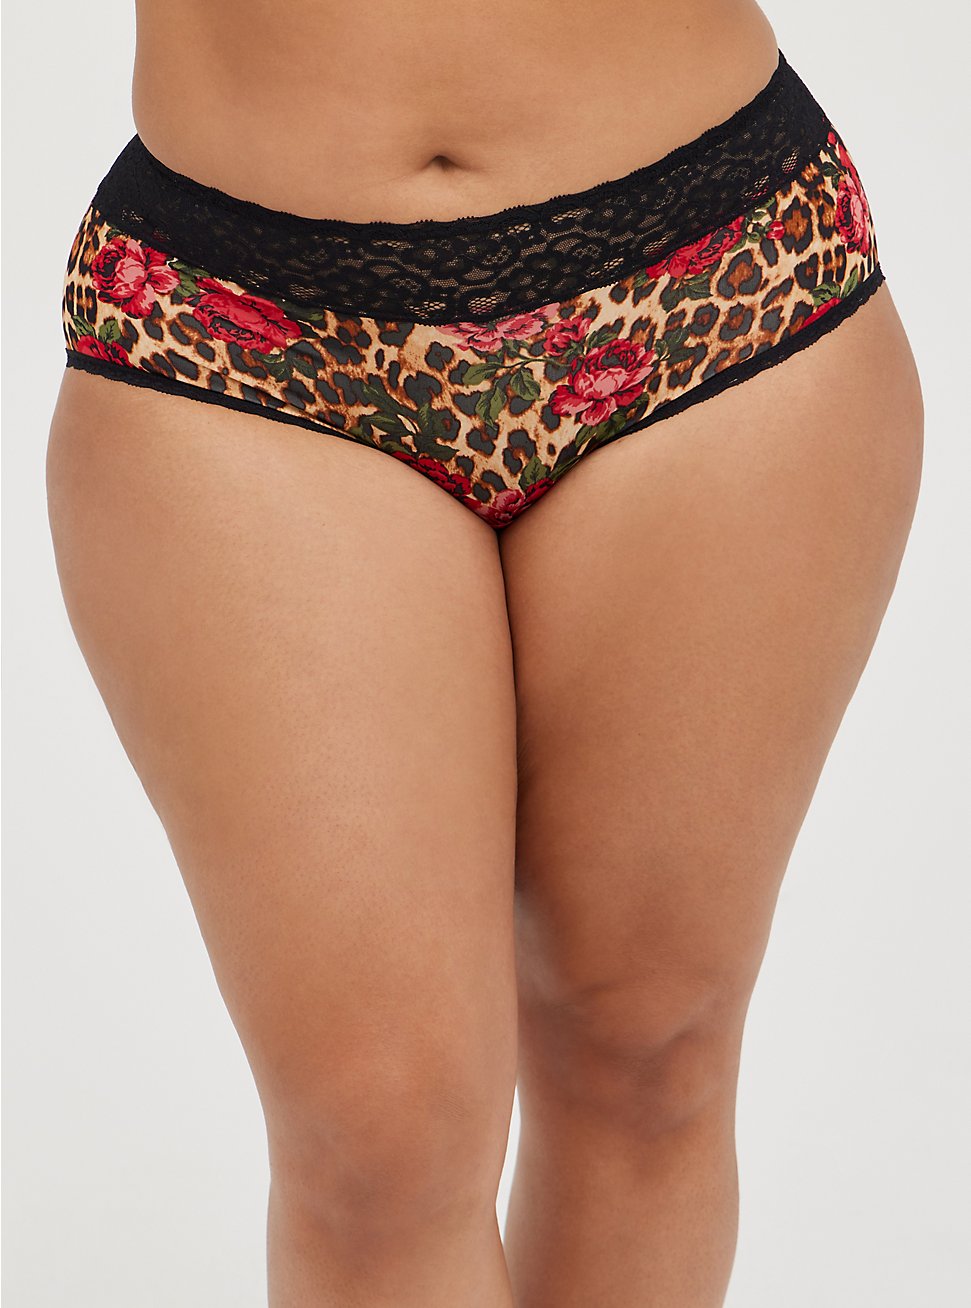 Plus Size Wide Lace Trim Second Skin Cheeky Panty - Leopard Floral , TRADITIONAL ROSES, hi-res